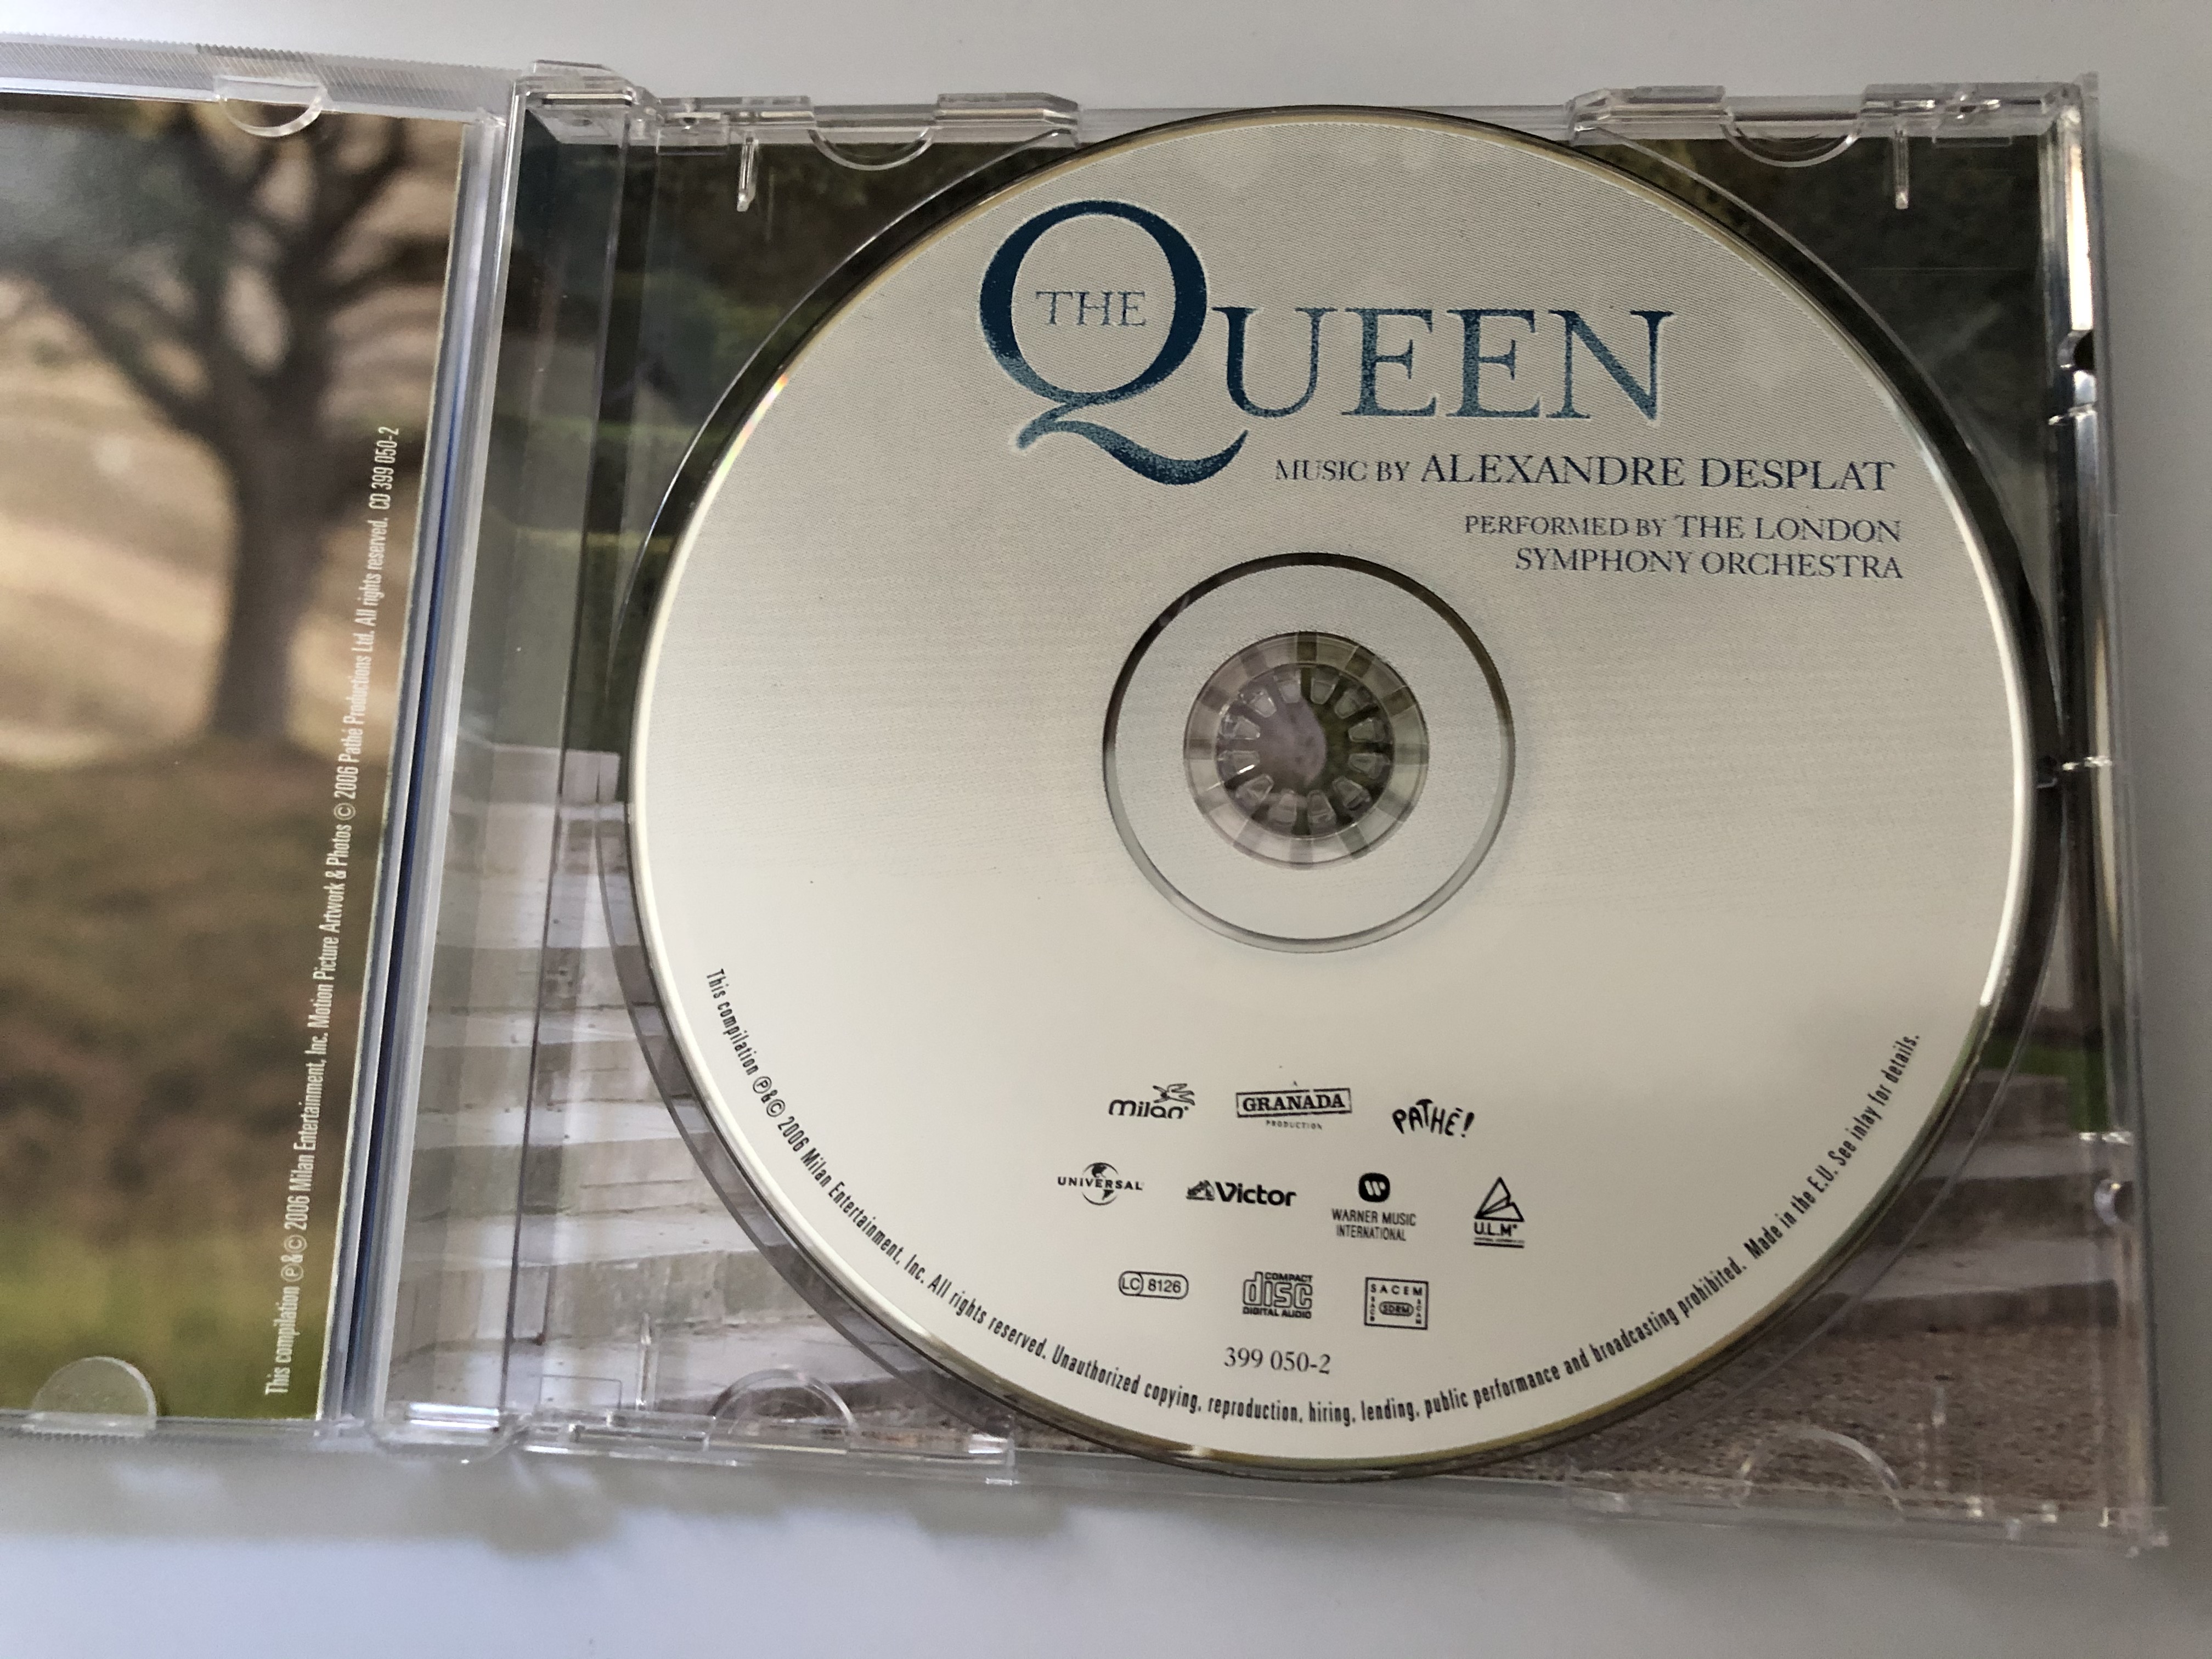 the-queen-music-by-alexandre-desplat-peformed-by-the-london-symphony-orchestra-milan-audio-cd-2006-399-050-2-4-.jpg